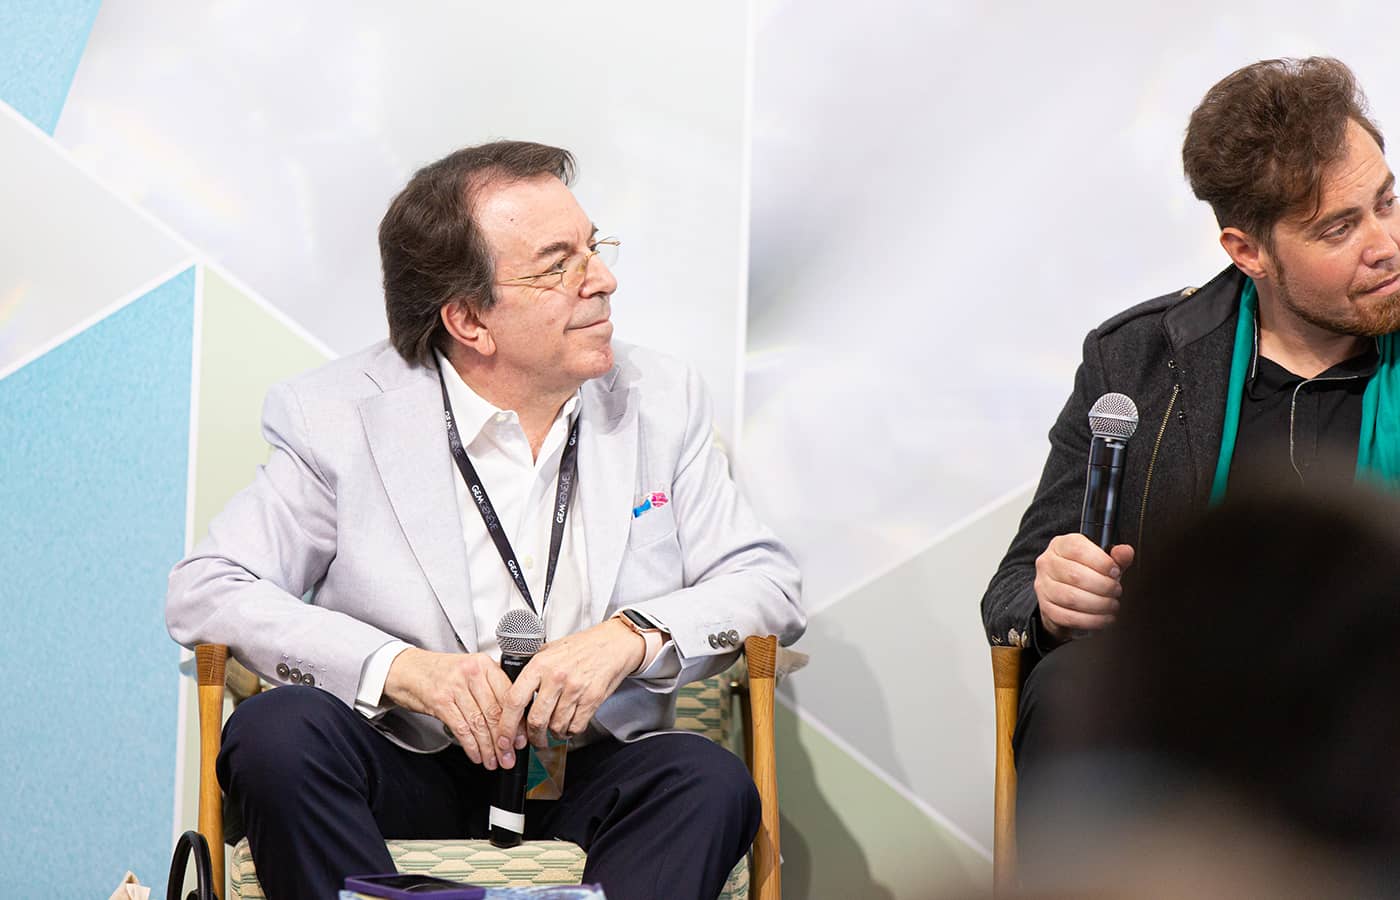 Spanish high jewellery artist Antonio Seijo participated in Katerina Perez's panel discussion at GemGenève in May 2022